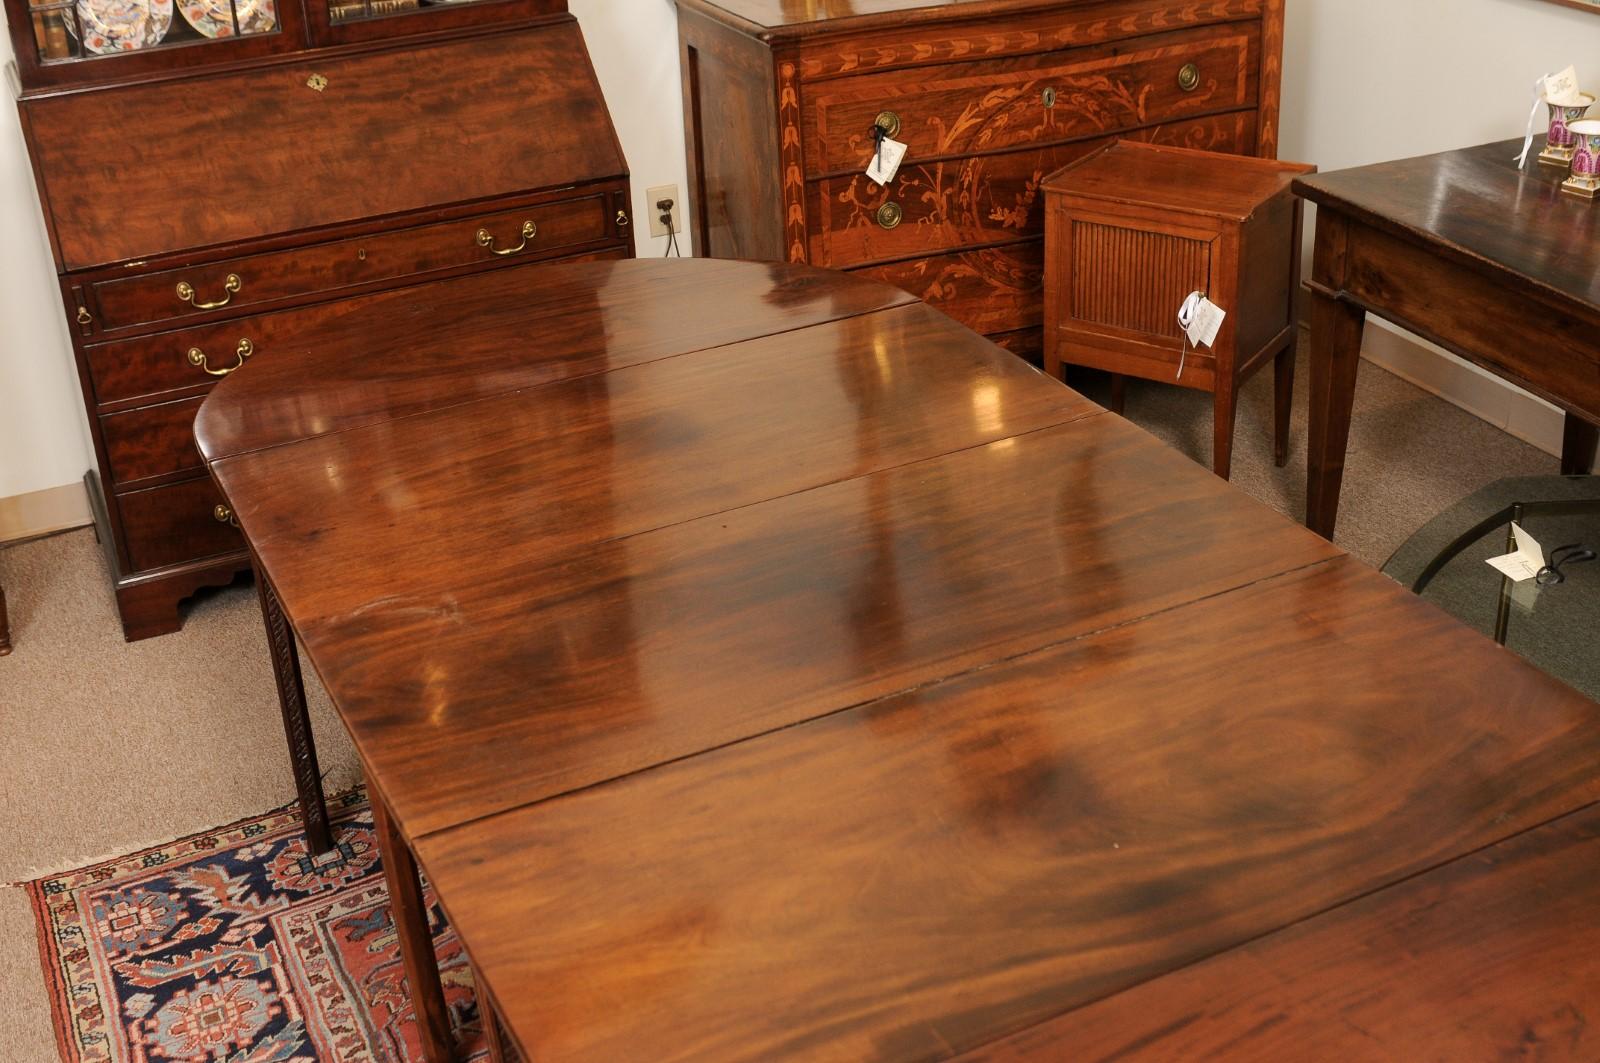 19th Century English Mahogany Dining Table with Carved Legs & 2 Leaves For Sale 8